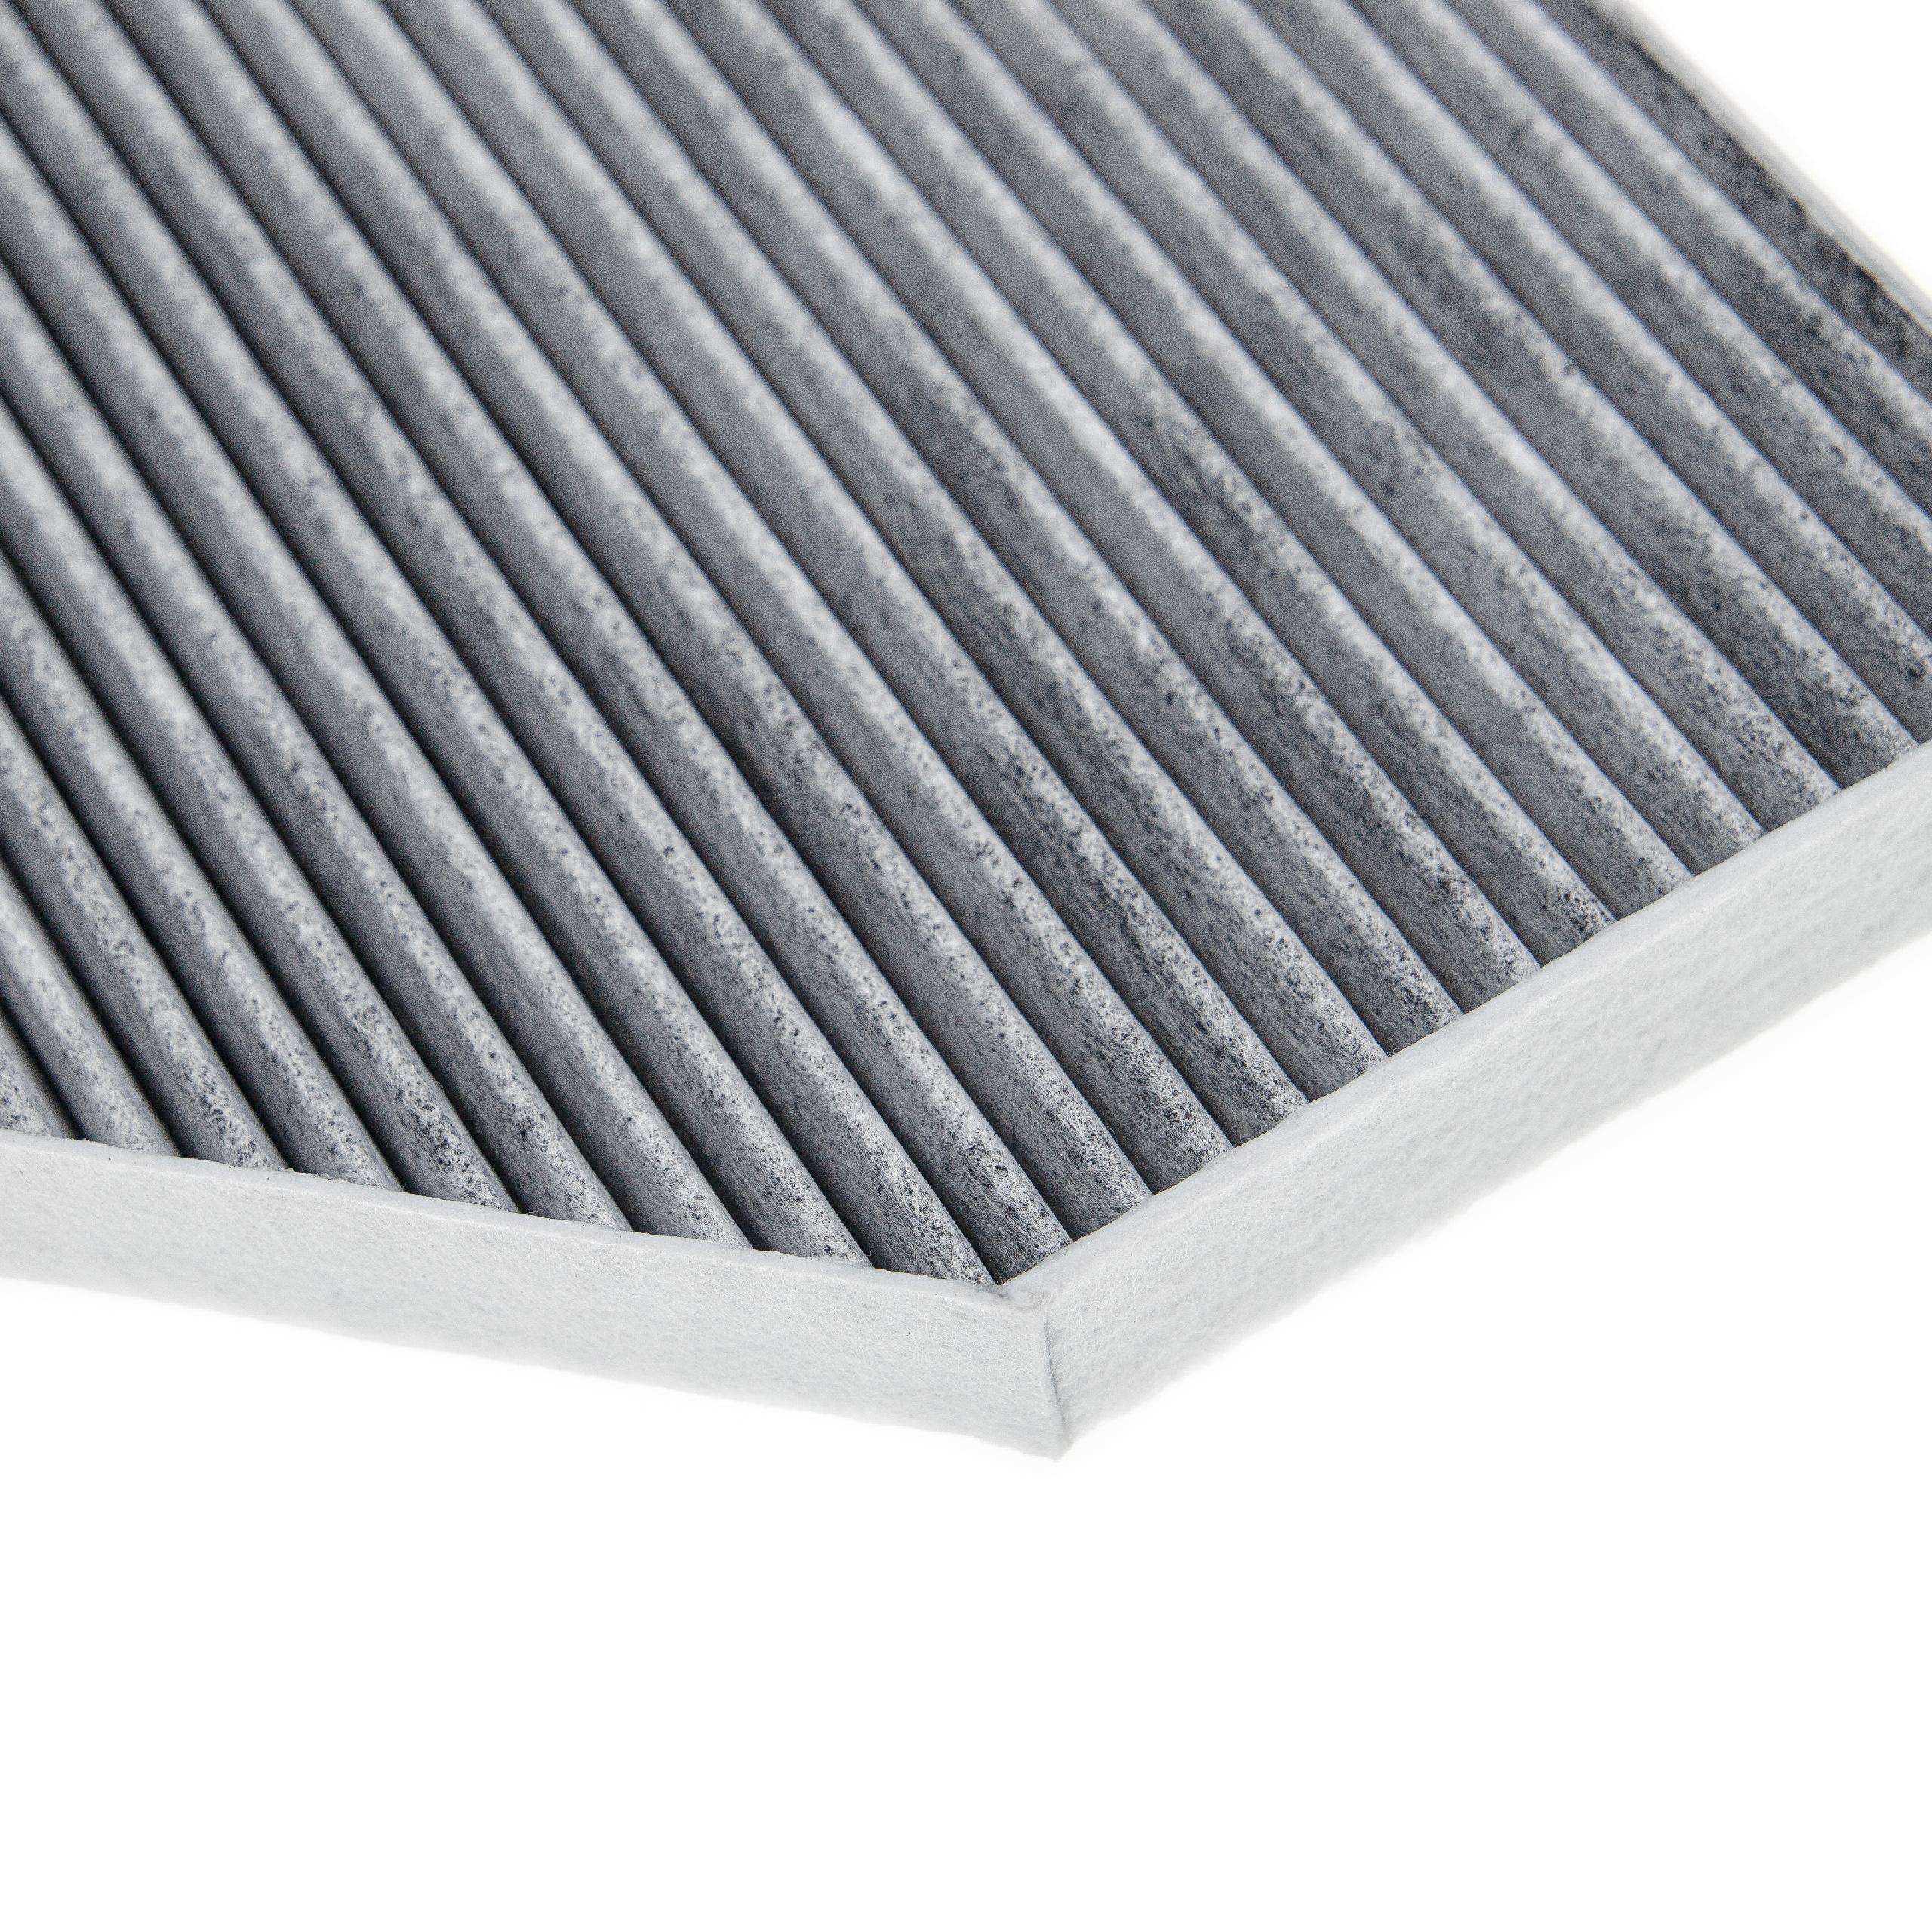 Cabin Air Filter replaces 3F Quality 670